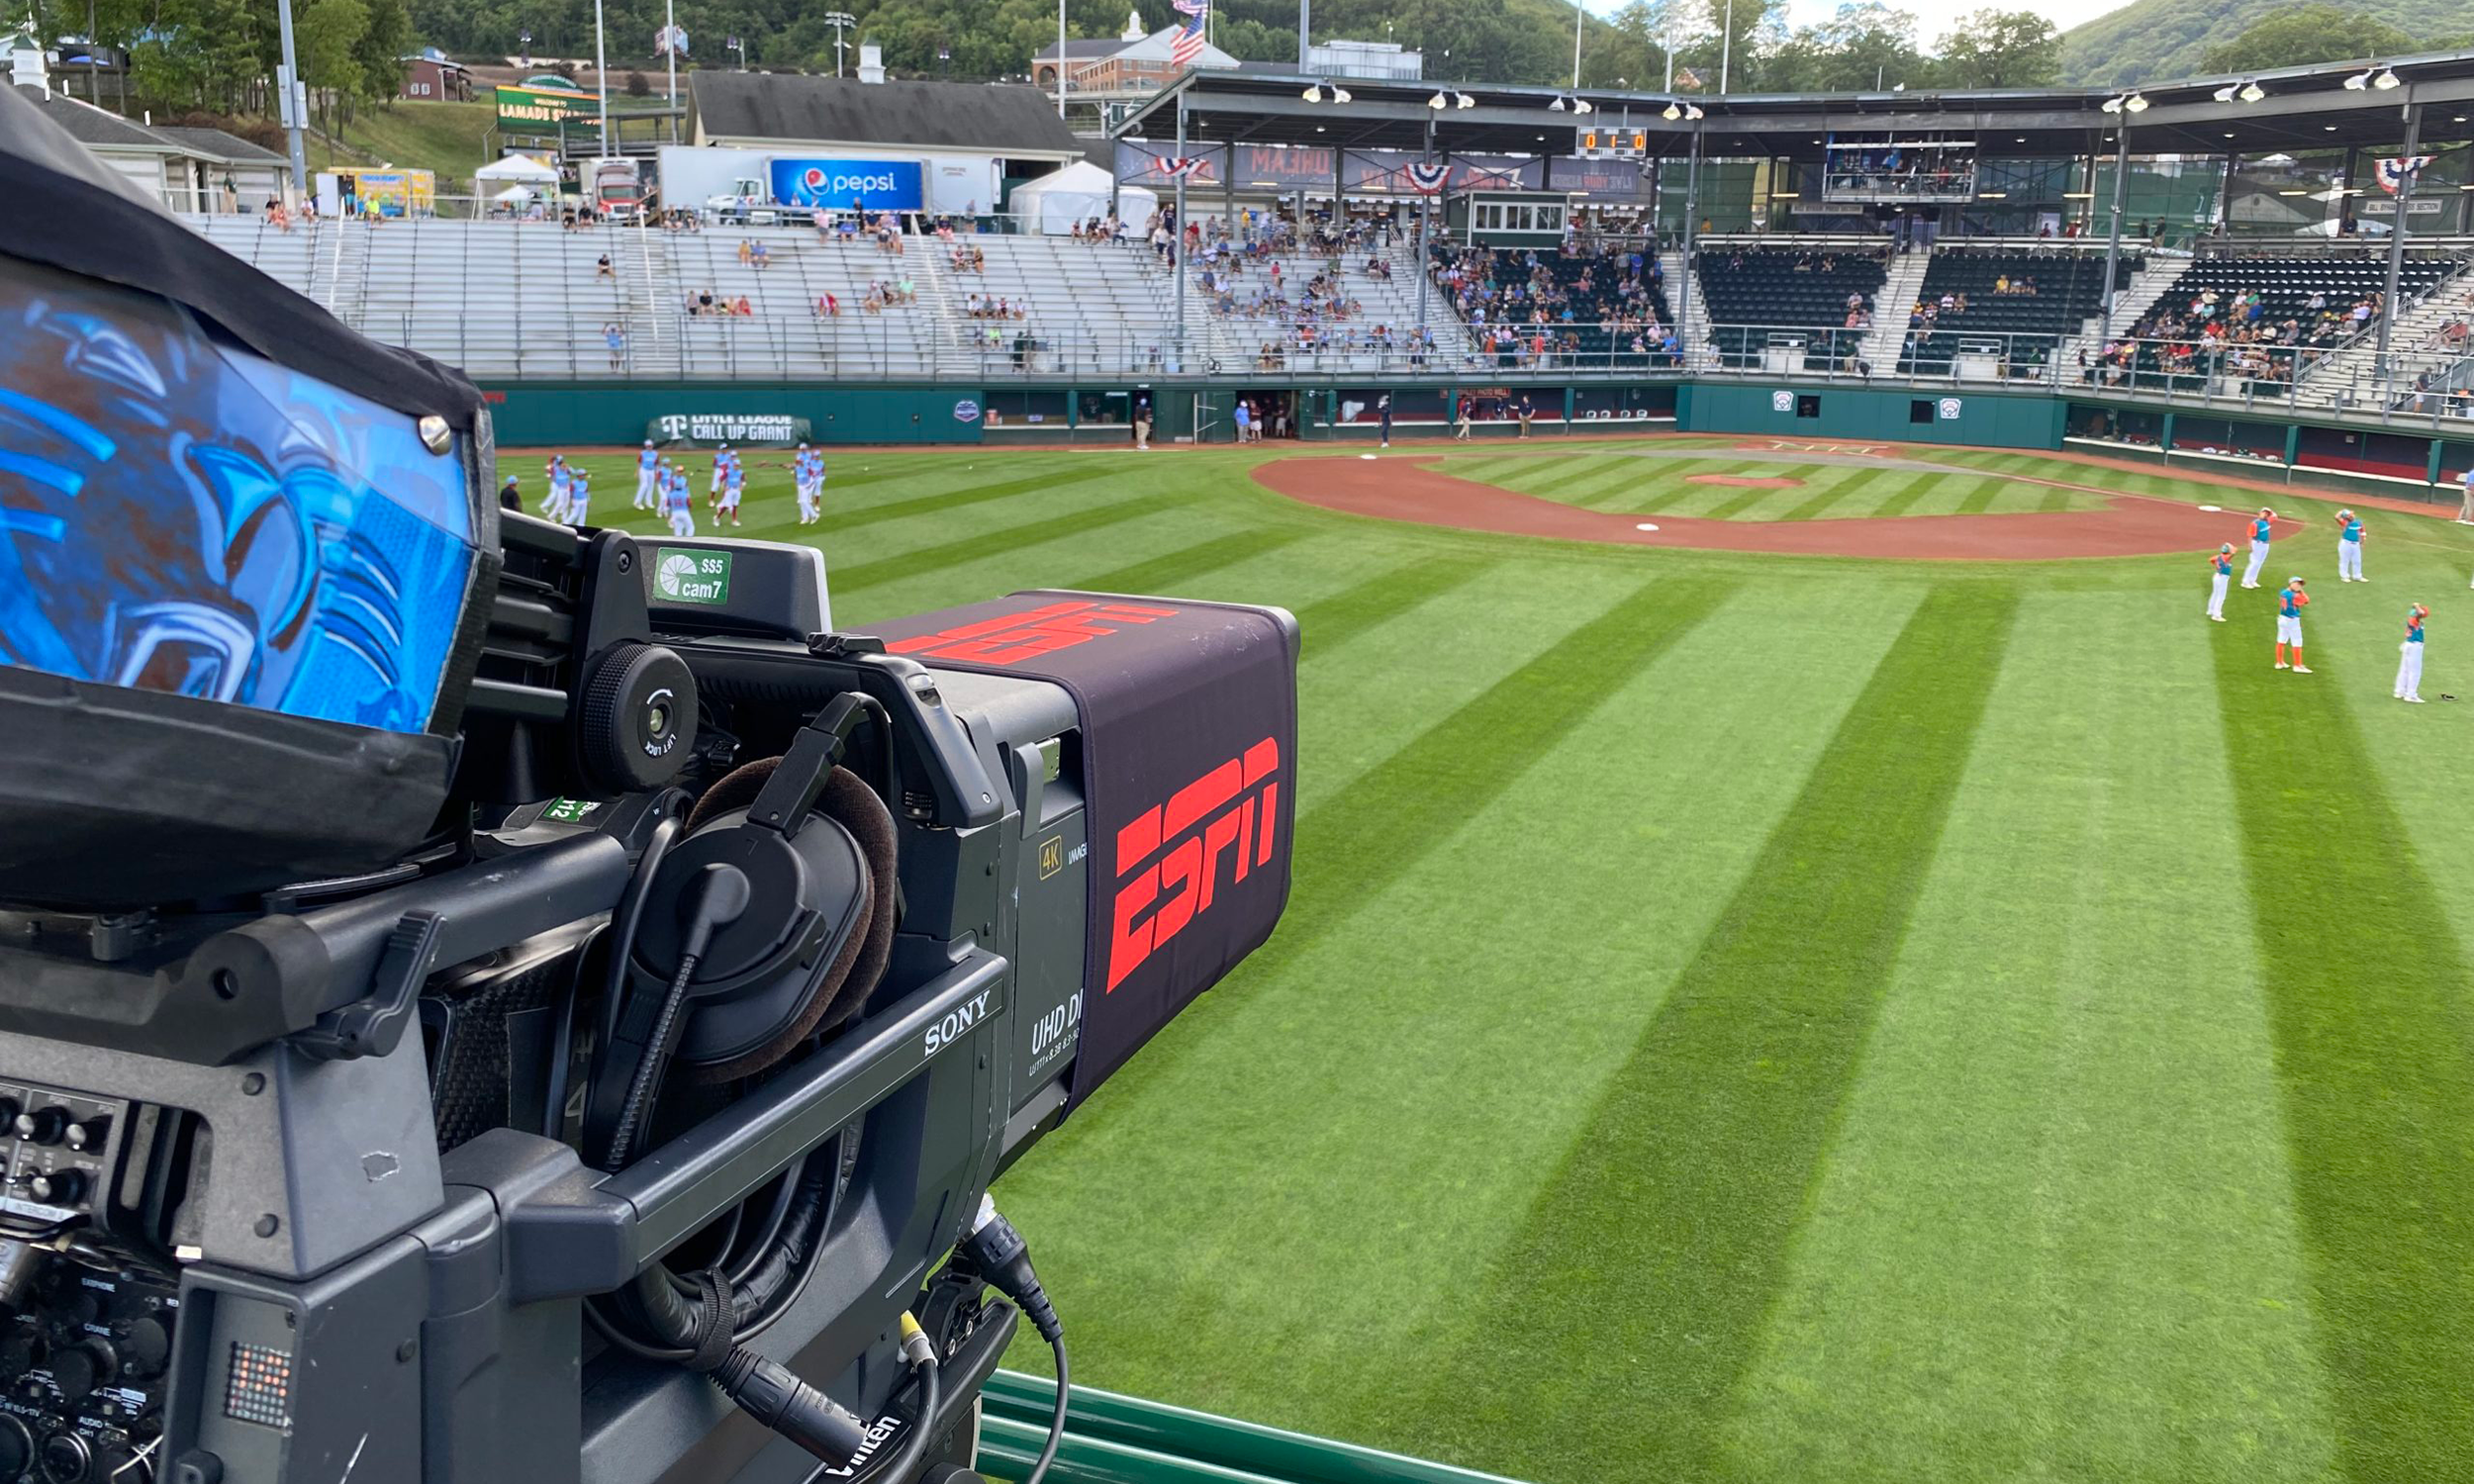 Little League Baseball World Series 2022 ESPN Expands Coverage With 1080p Production, New-Look Compound